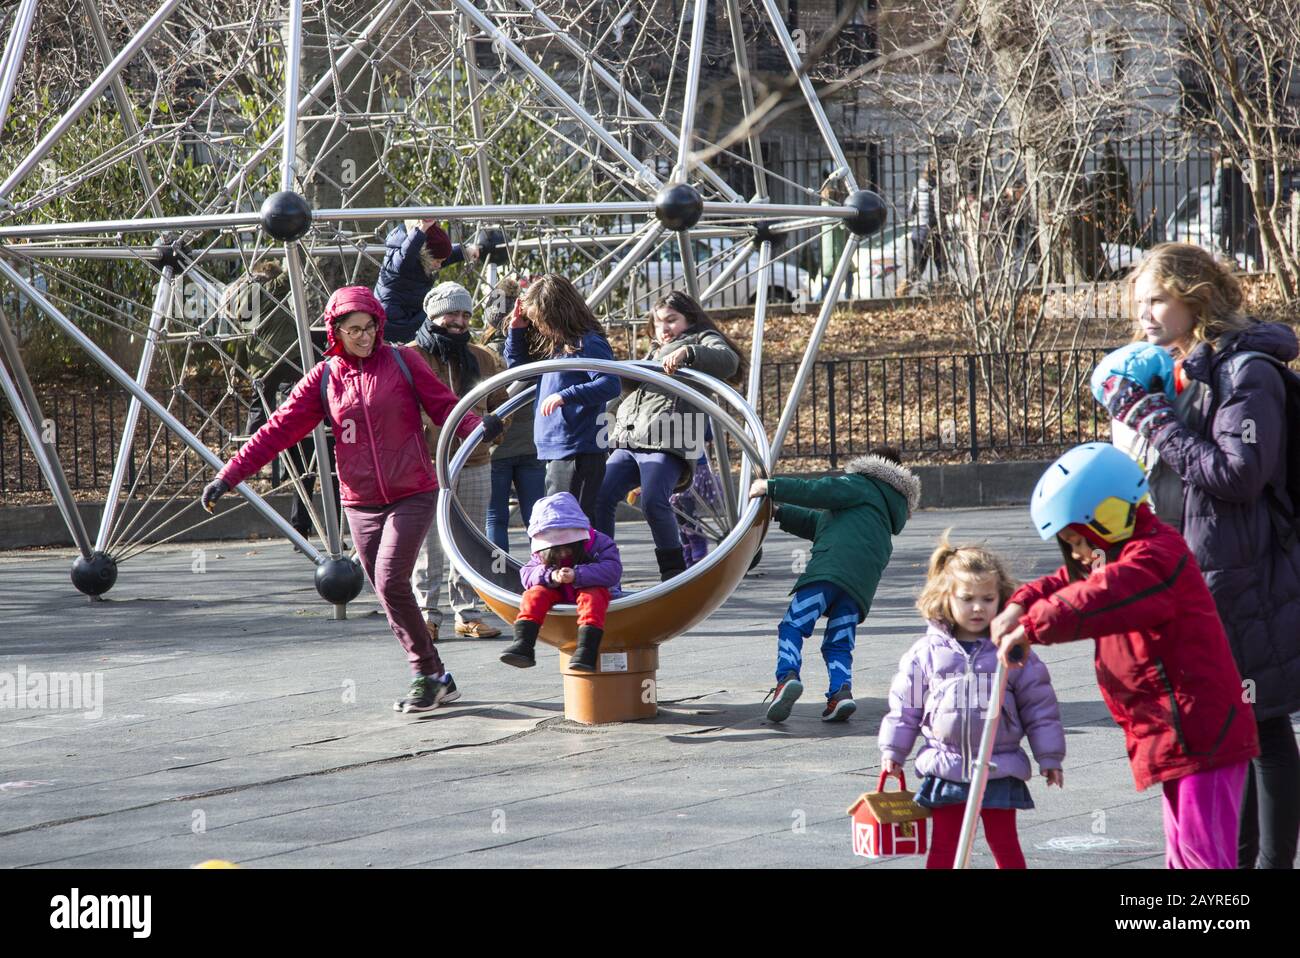 Children and parents enjoy a mild winter day on a playground in Prospect Park, Brooklyn, New York. Stock Photo